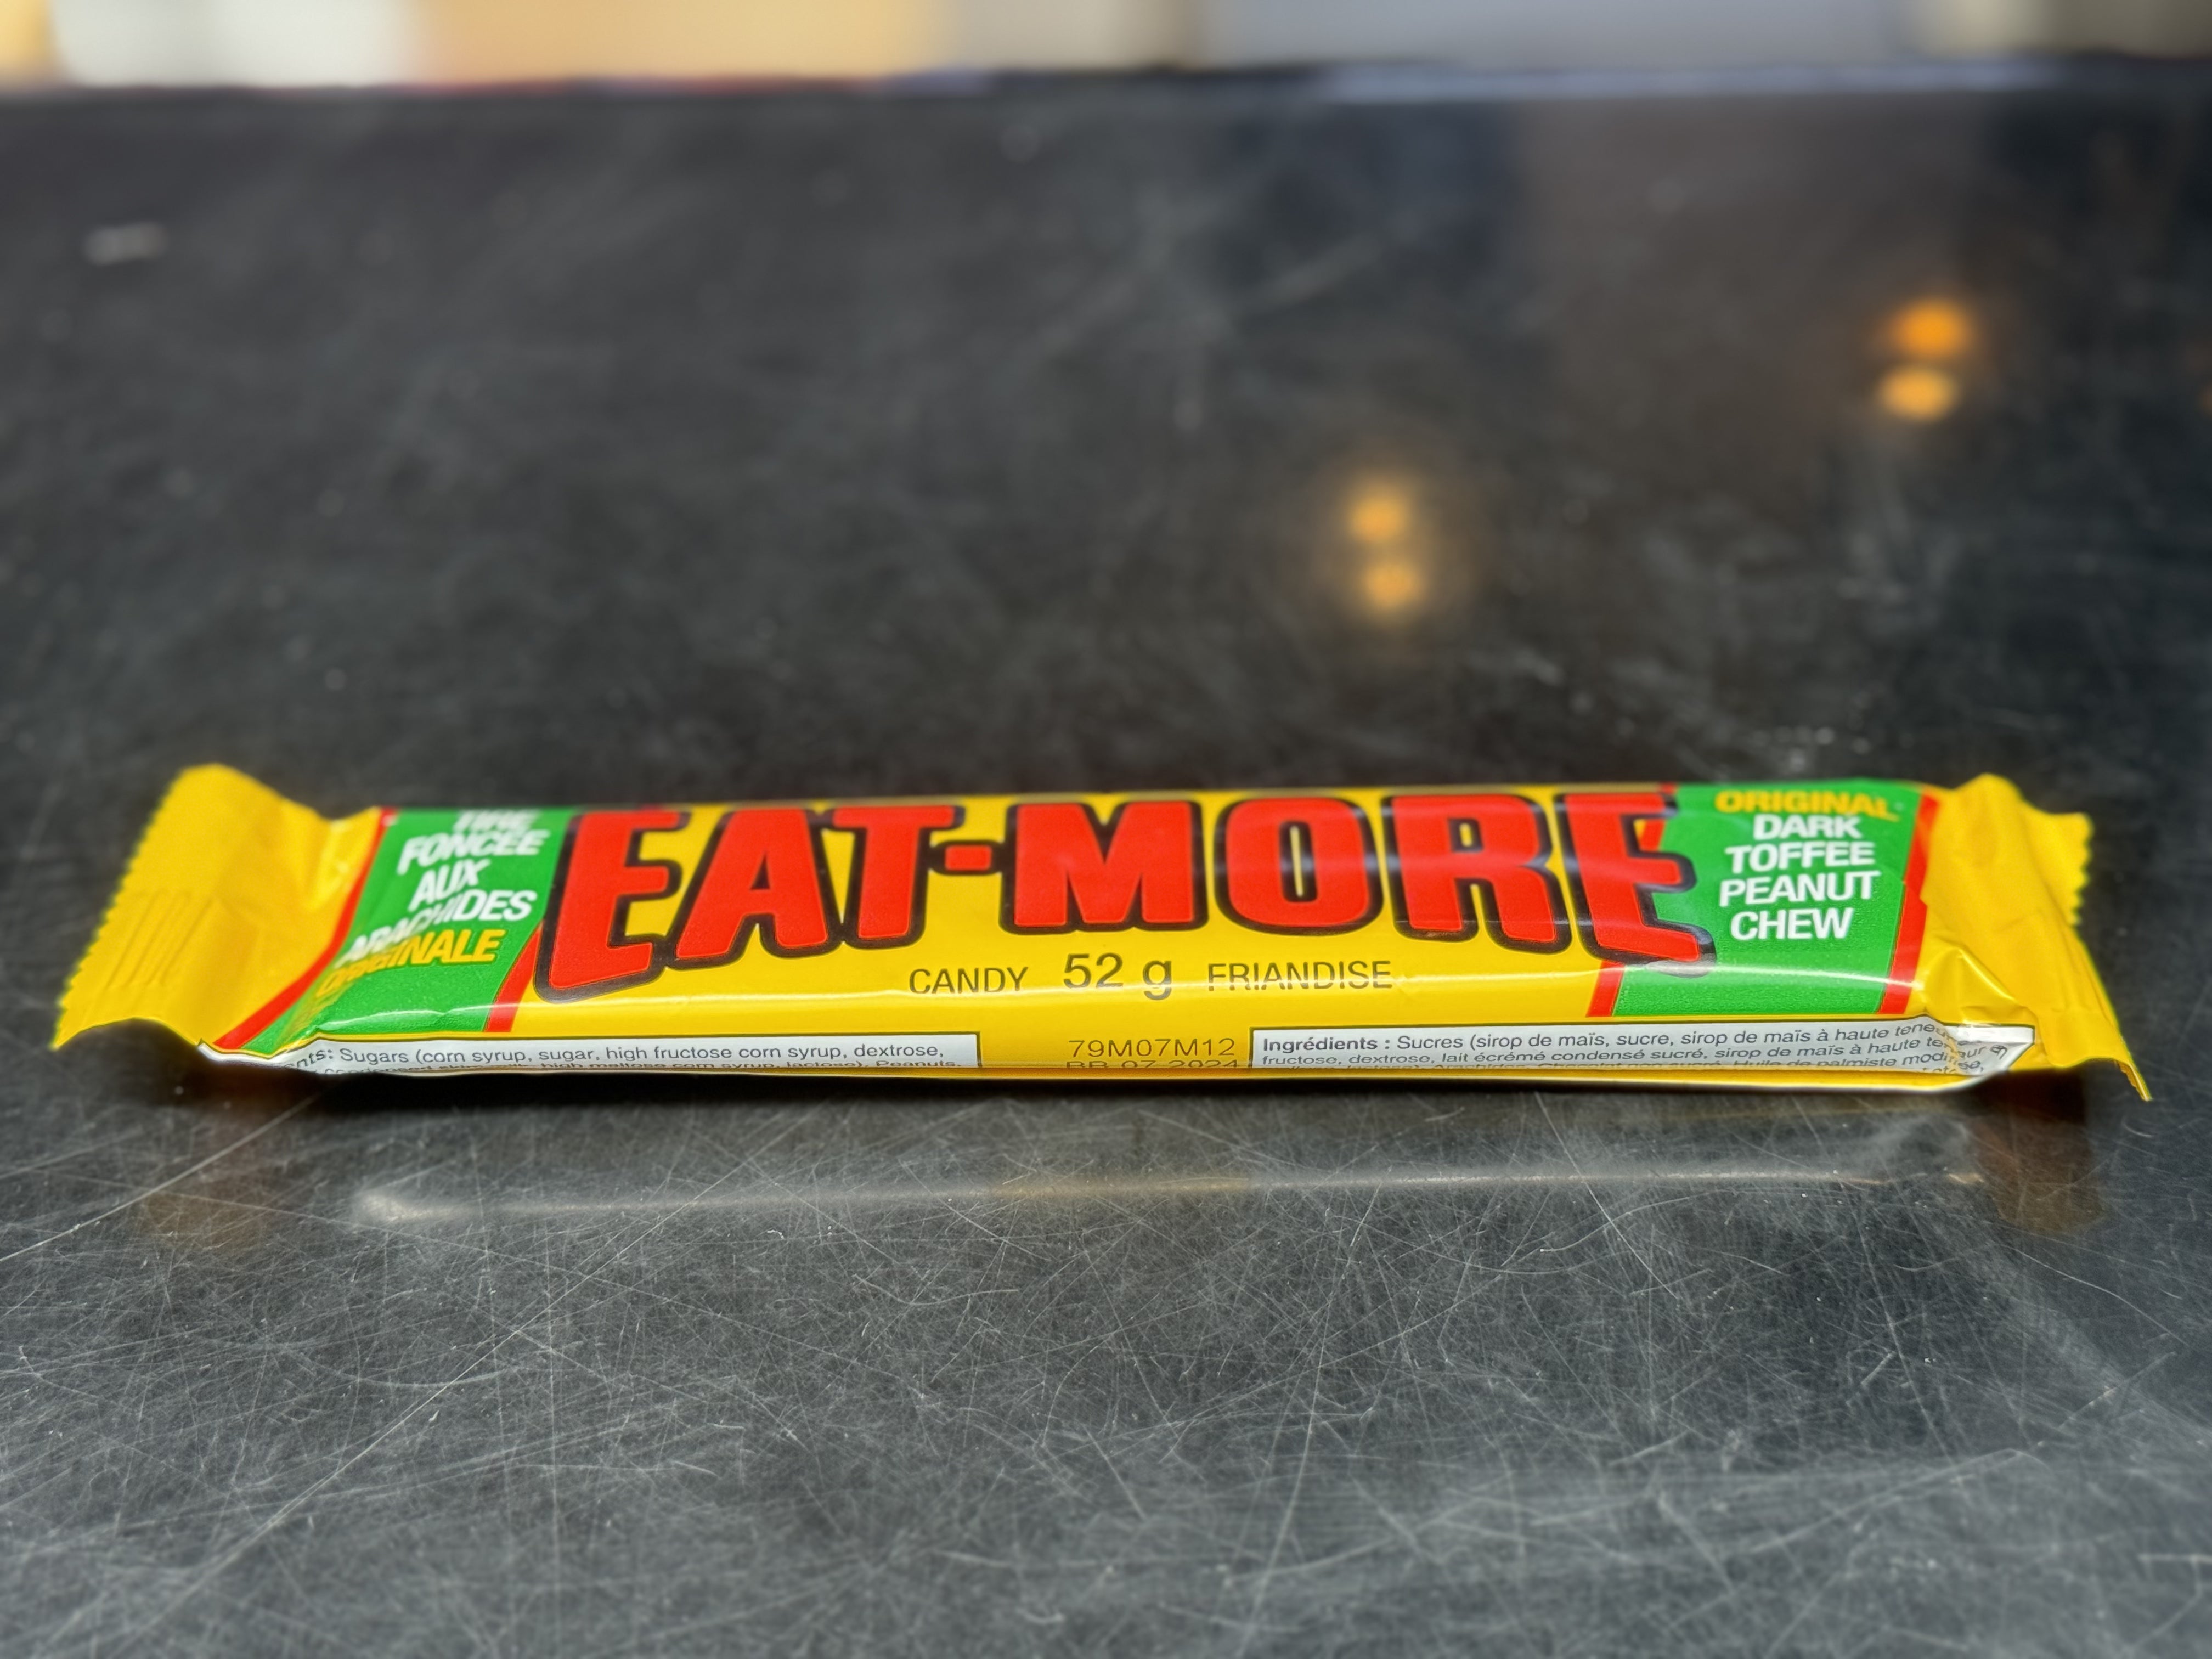 Eat-More Candy 52g